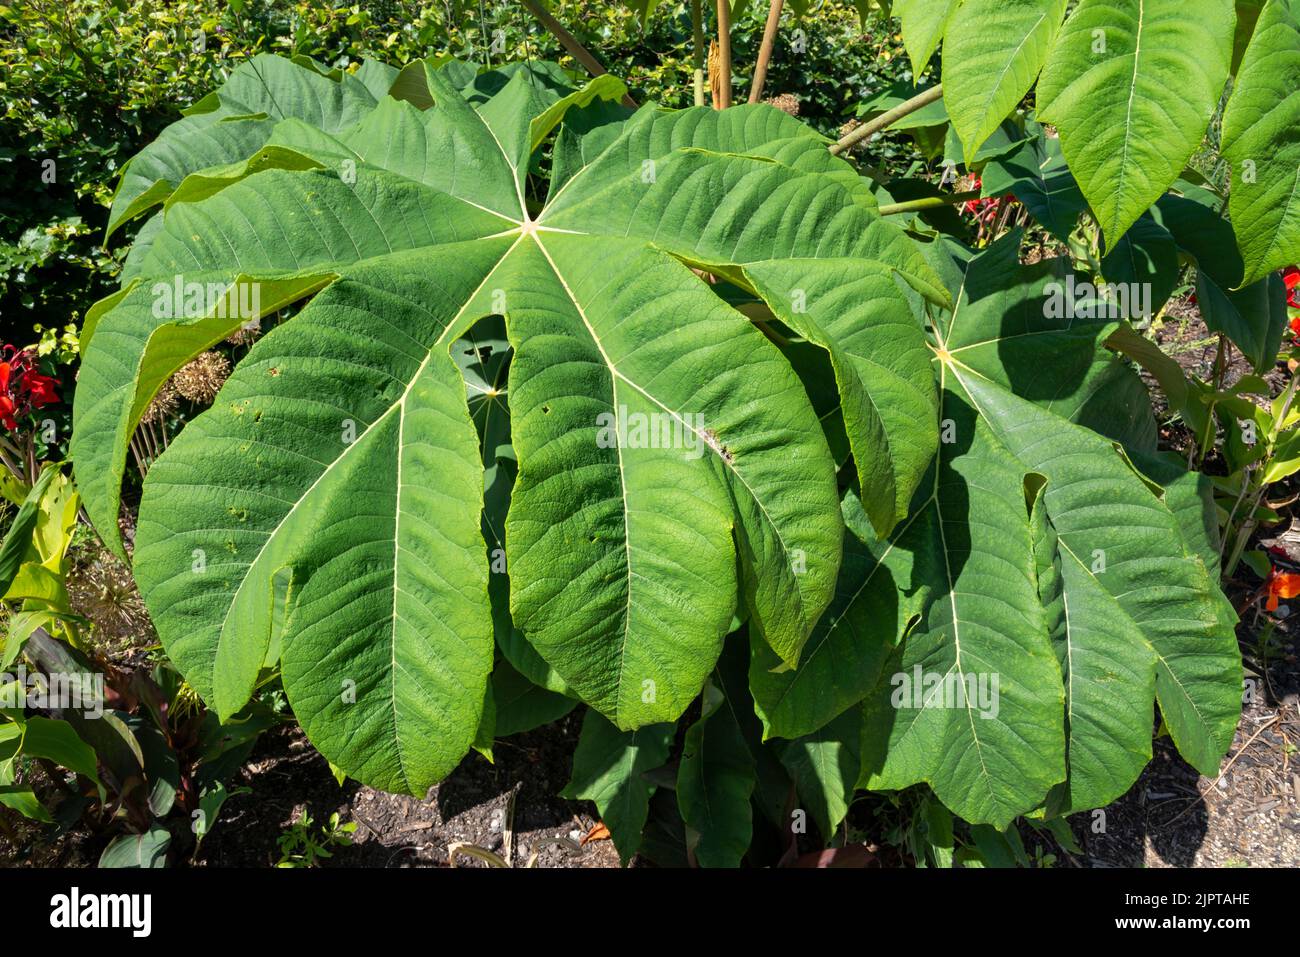 Tetrapanax papyrifer 'Rex', Chinese rice-paper plant 'Rex'. A tree grown for it's huge ornamental foliage. Stock Photo